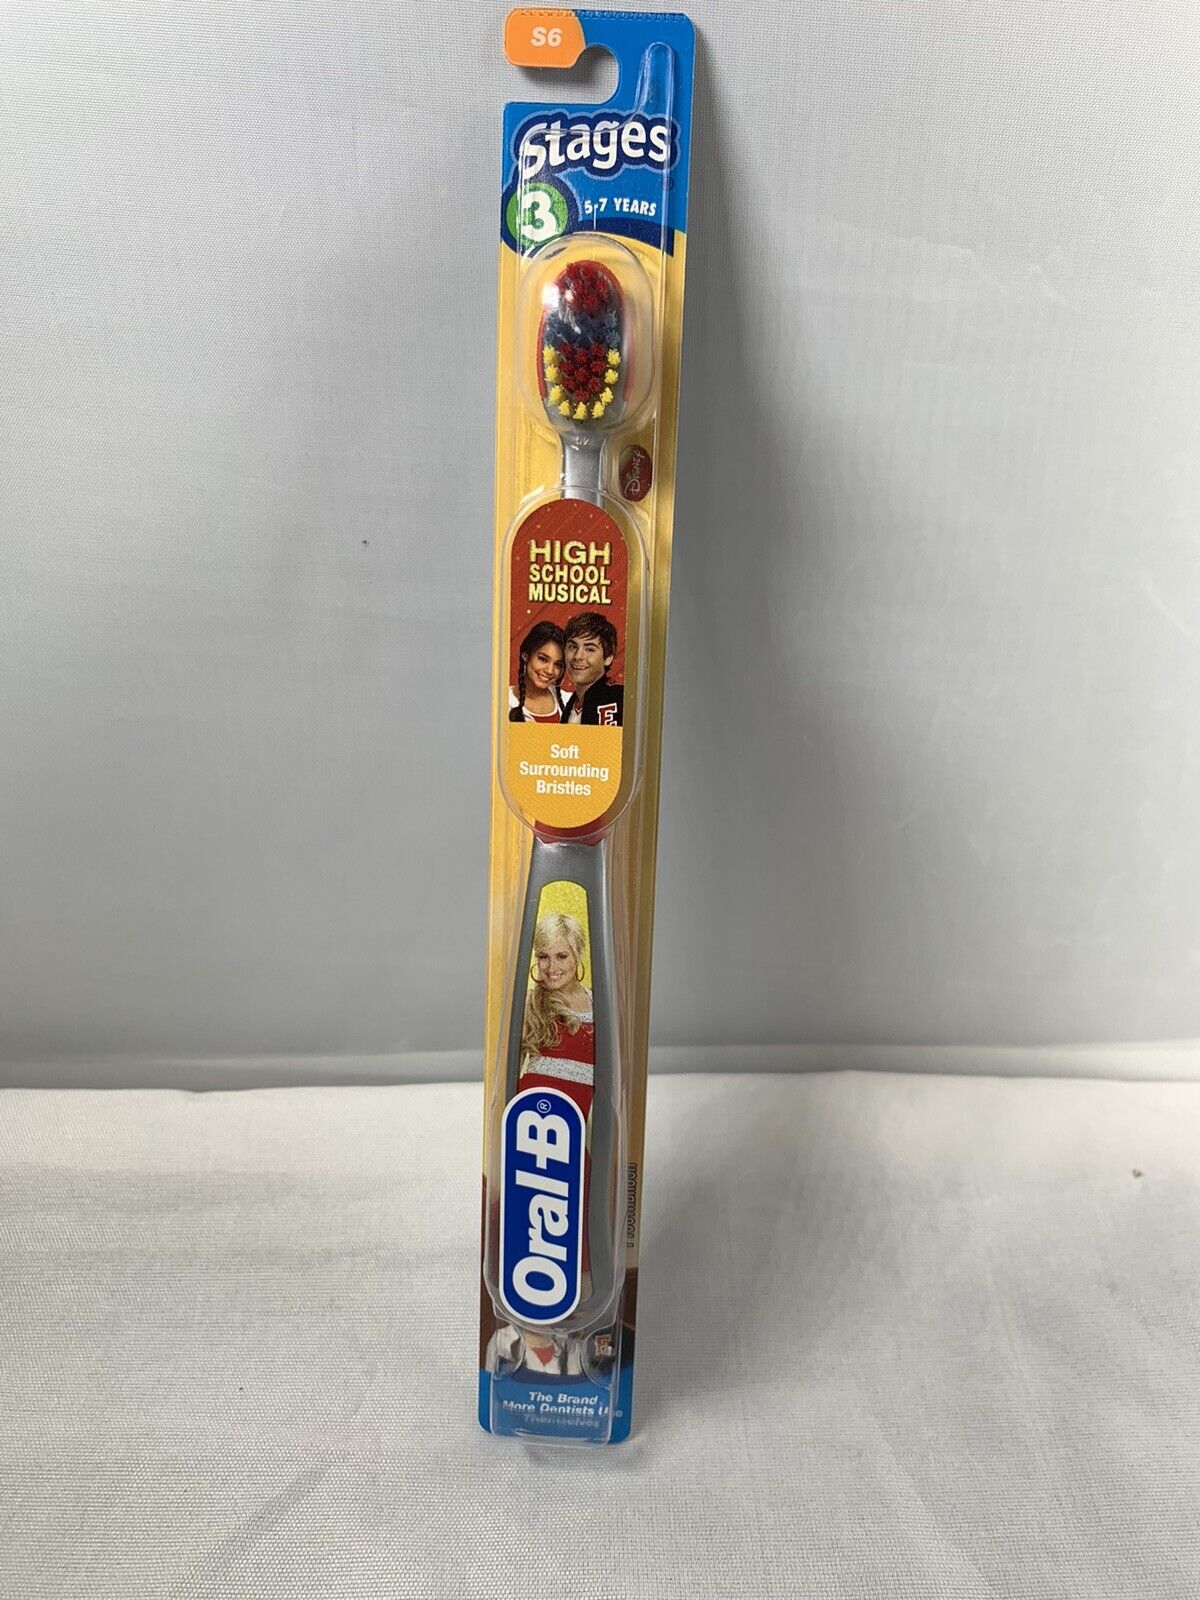 NOS HIGH SCHOOL MUSICAL ORAL B TOOTHBRUSH Stages 3 HSM 5-7 Yrs. Dental Oral Care